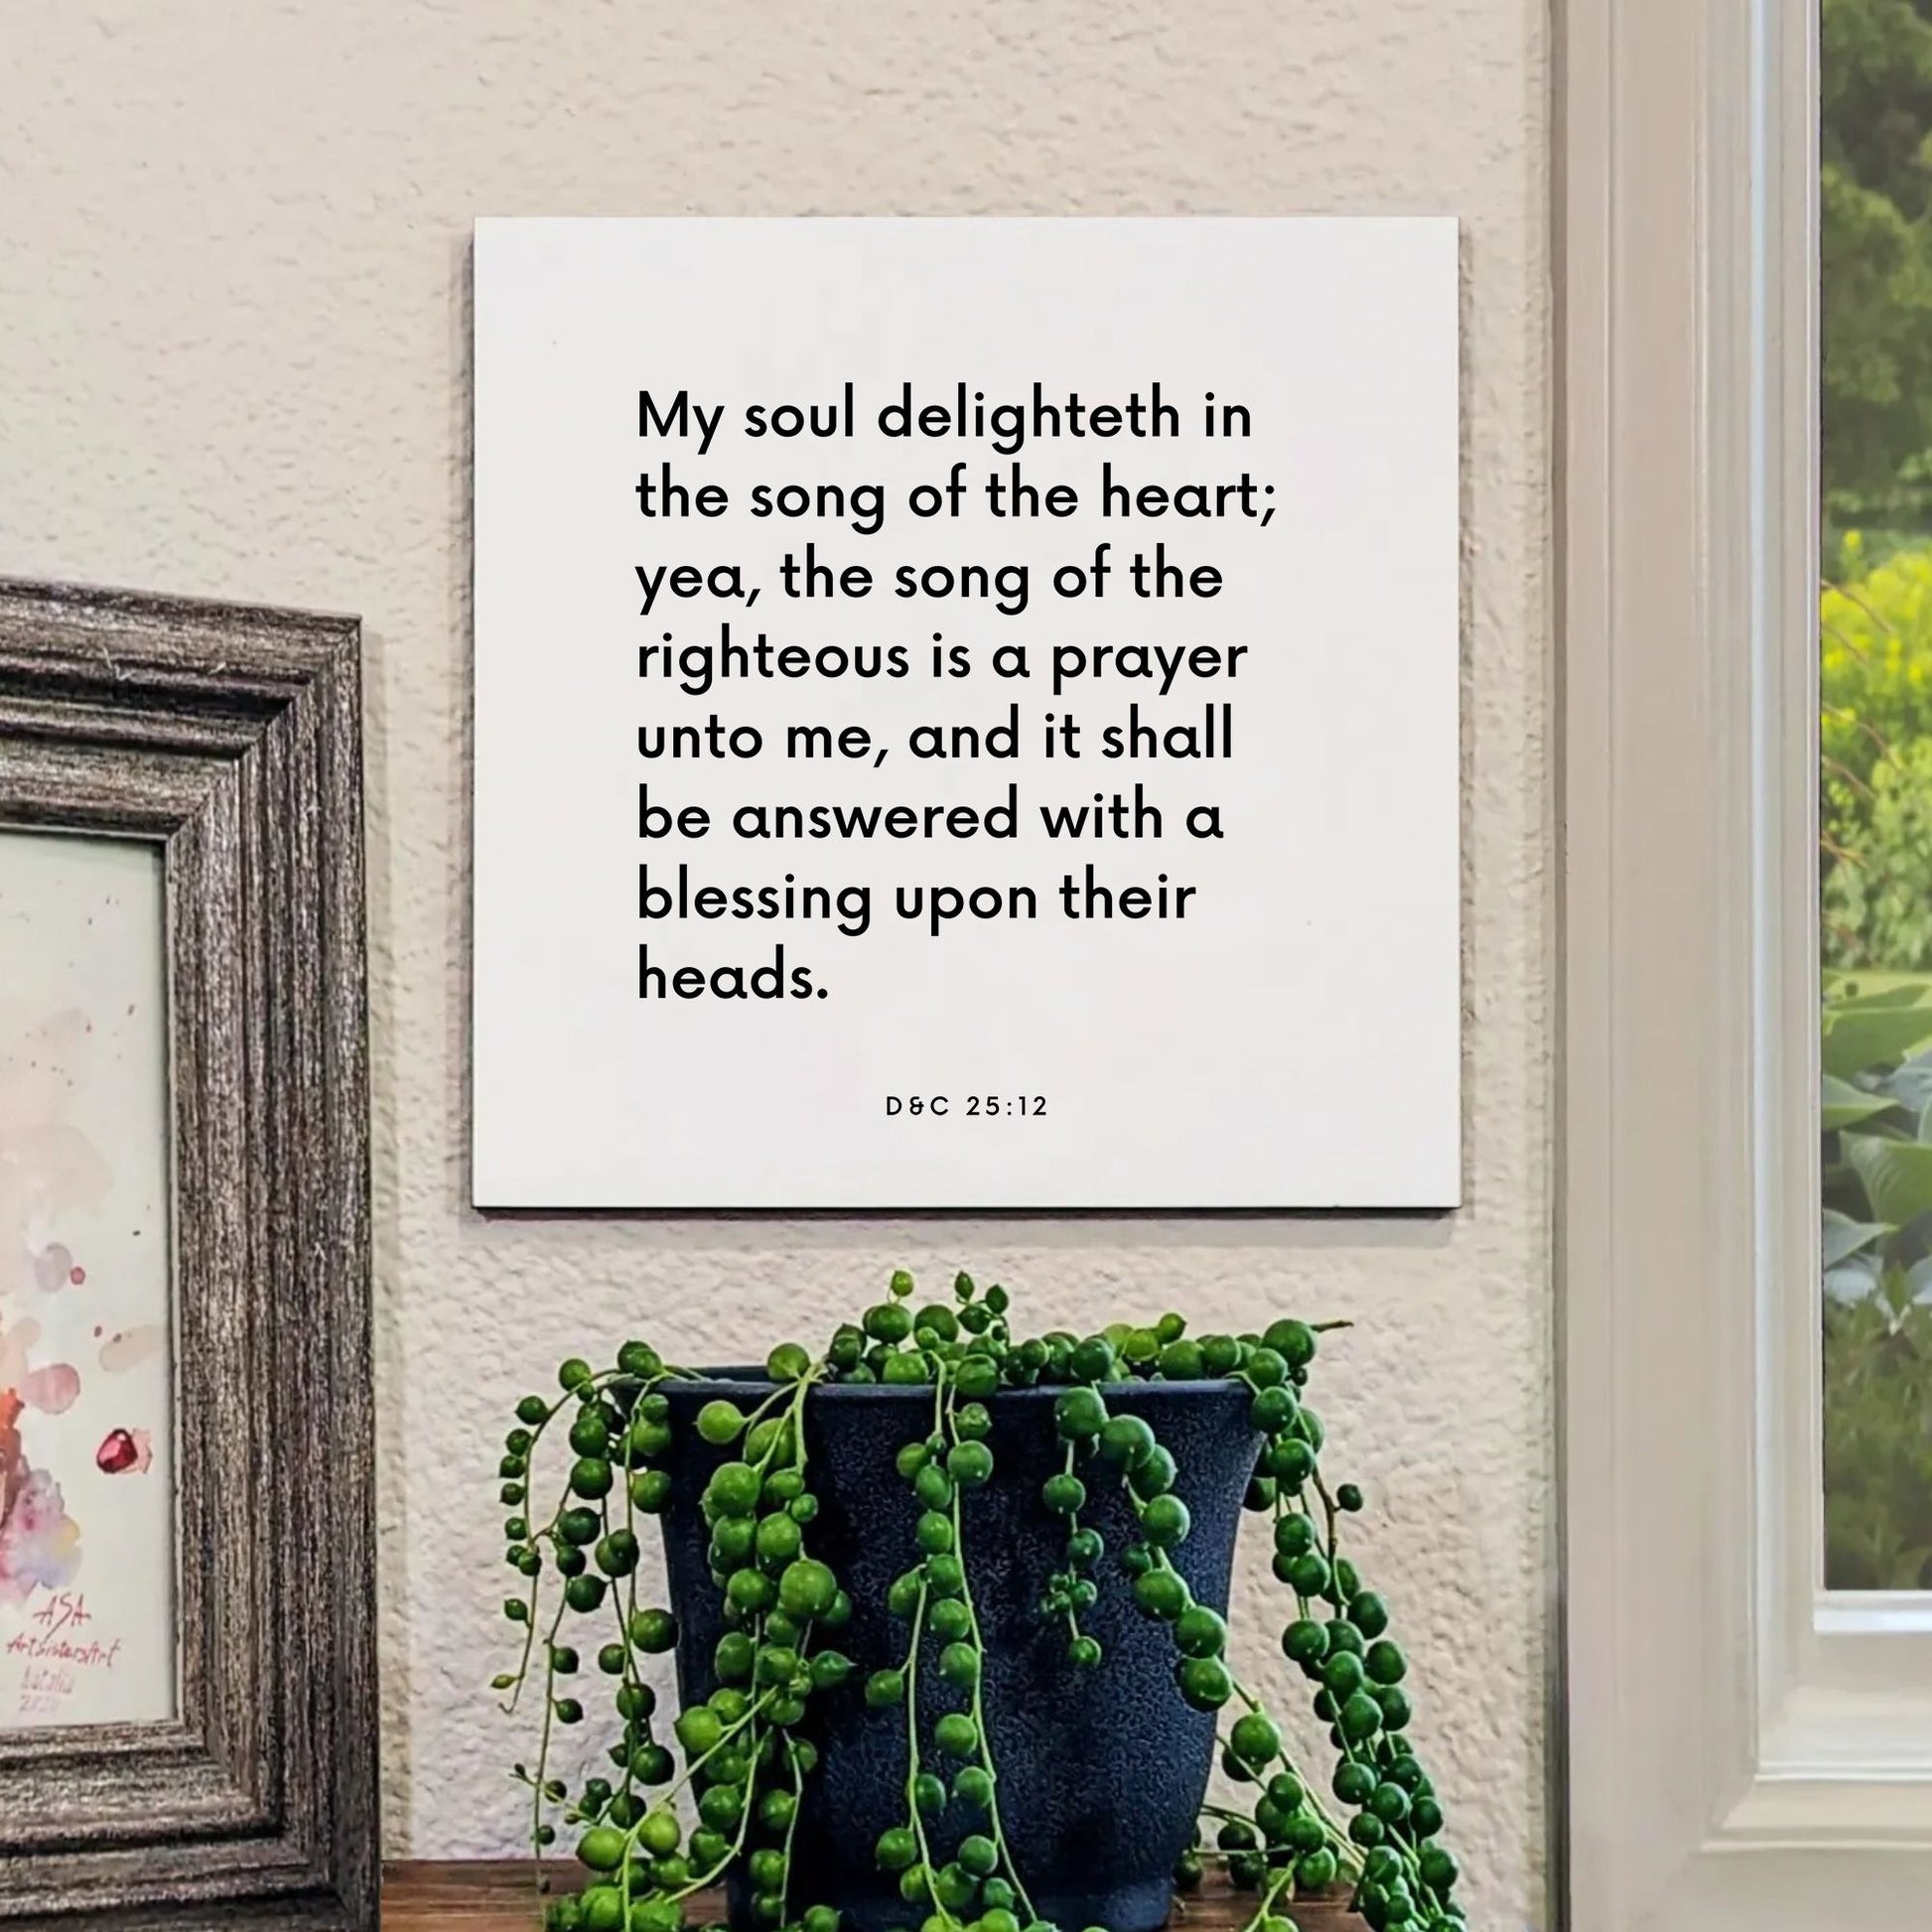 Window mouting of the scripture tile for D&C 25:12 - "The song of the righteous is a prayer unto me"